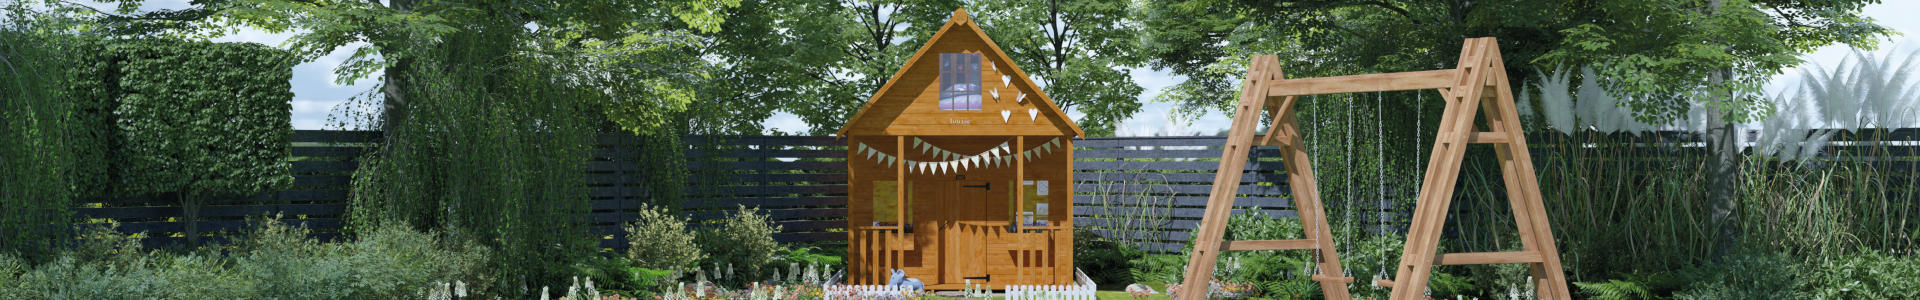 Wooden Playhouses